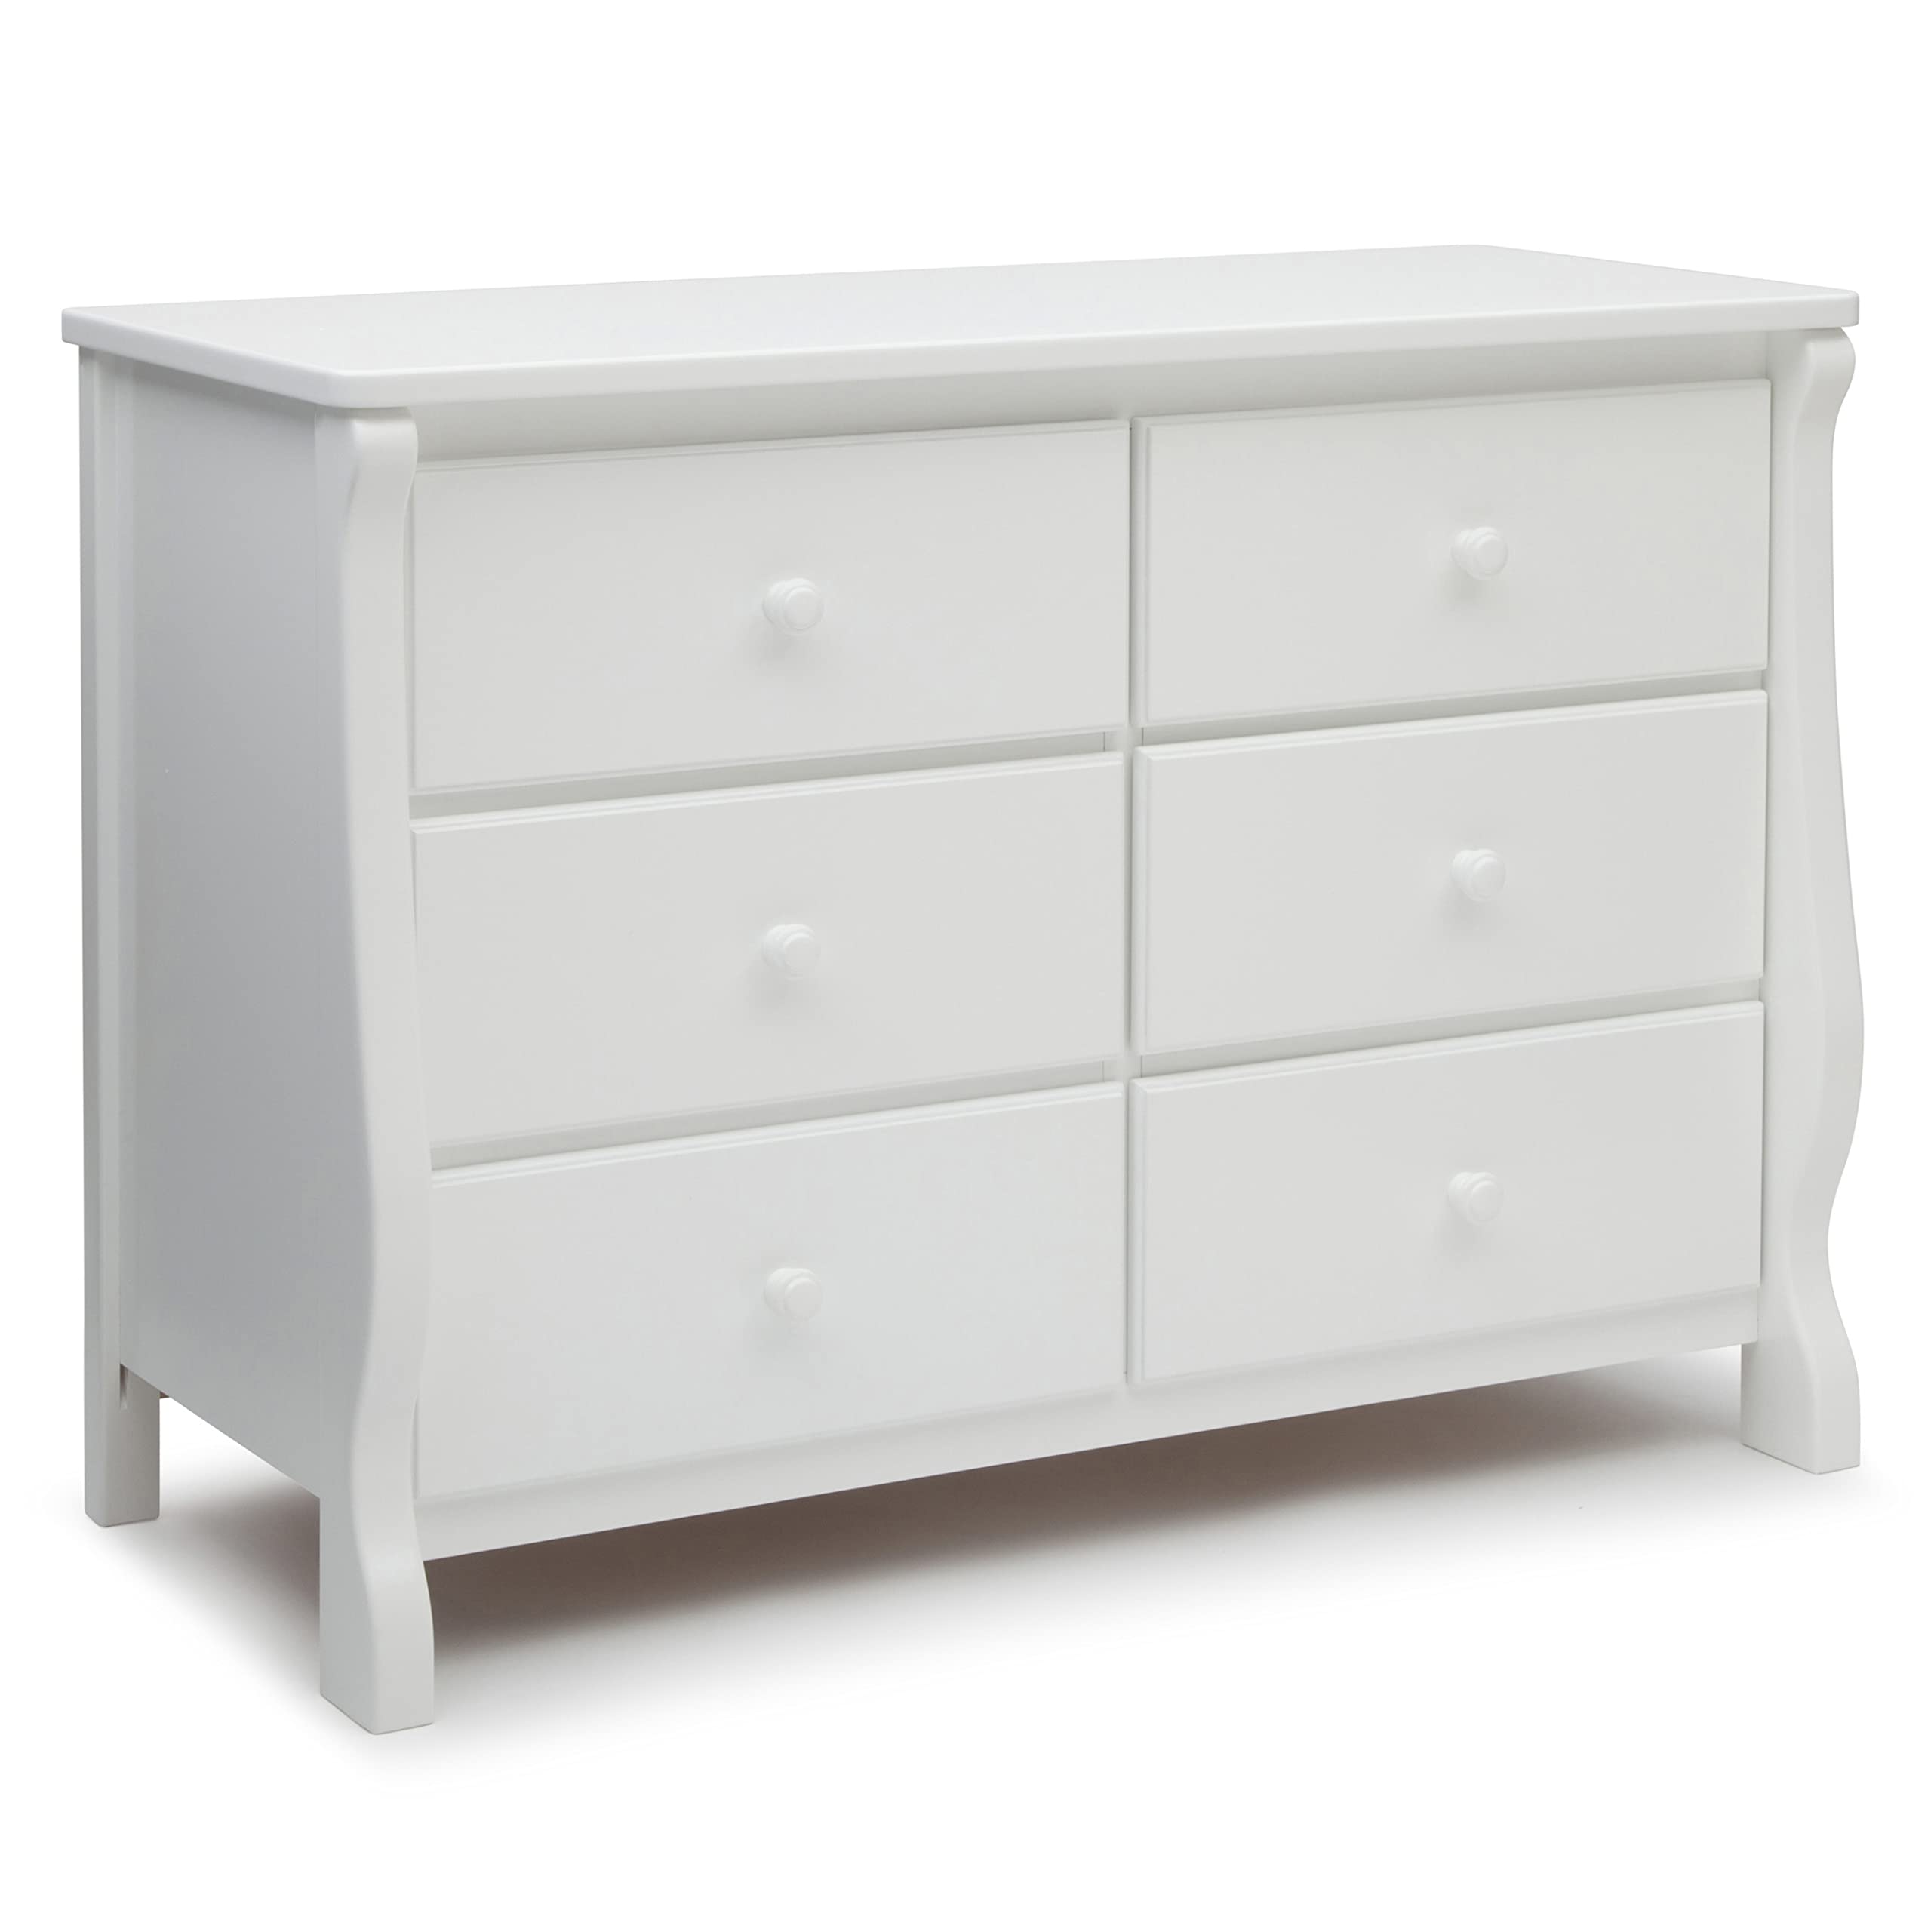 Delta Children Universal 6 Drawer Dresser with Interlocking Drawers - Greenguard Gold Certified, White & Eclipse Changing Table with Changing Pad, White